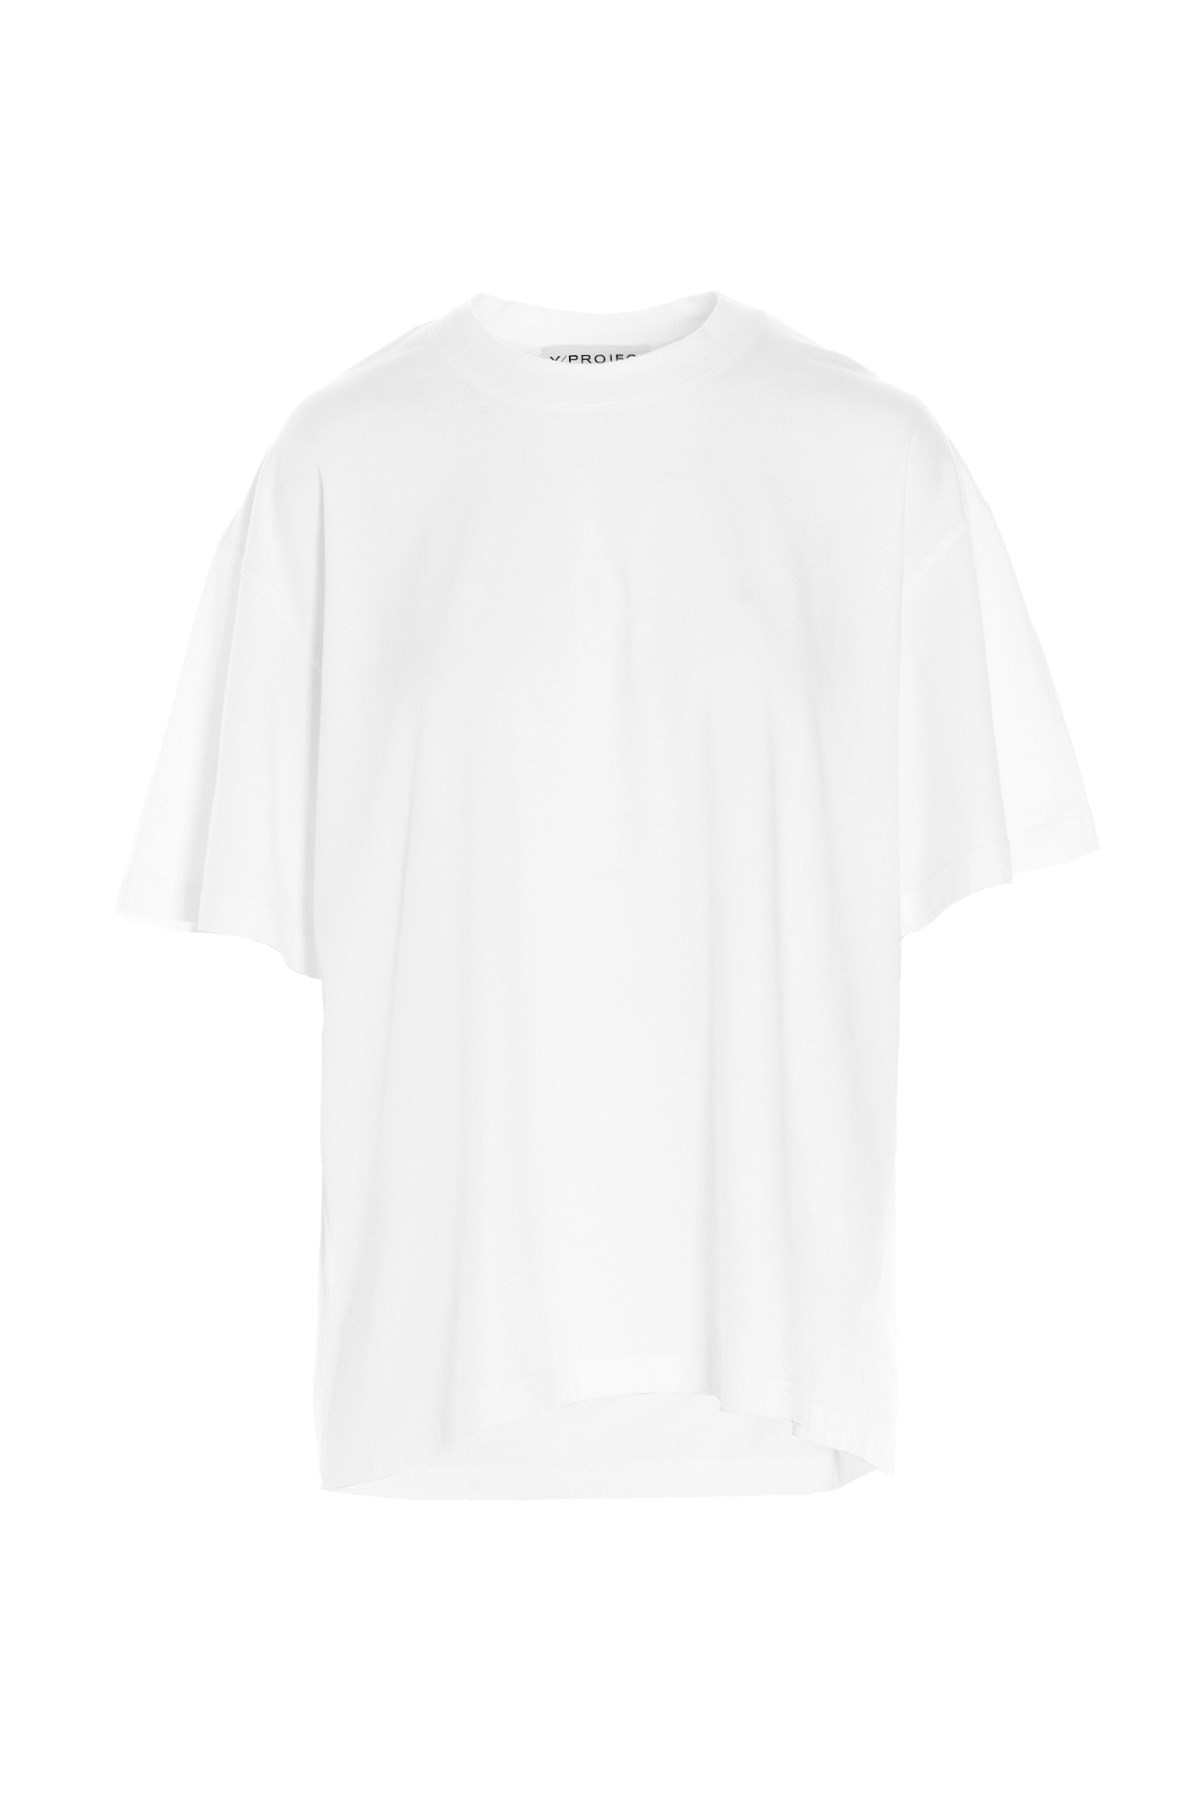 Y/PROJECT Back Cut Out T-Shirt